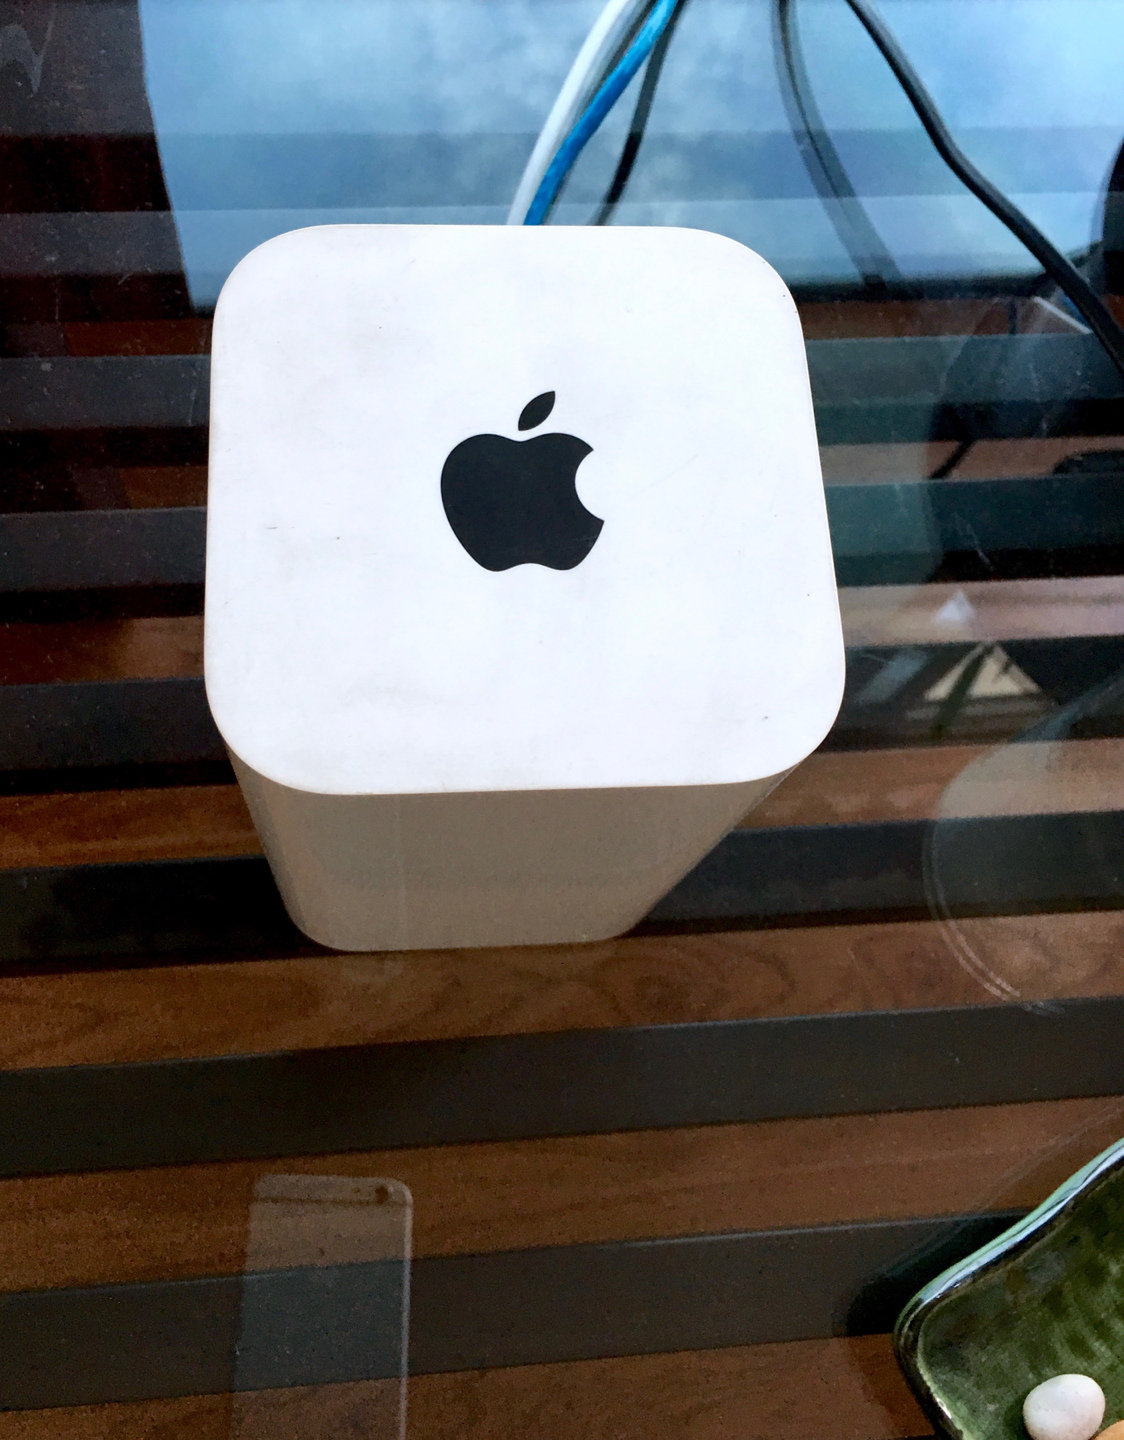 Airport Extreme Router